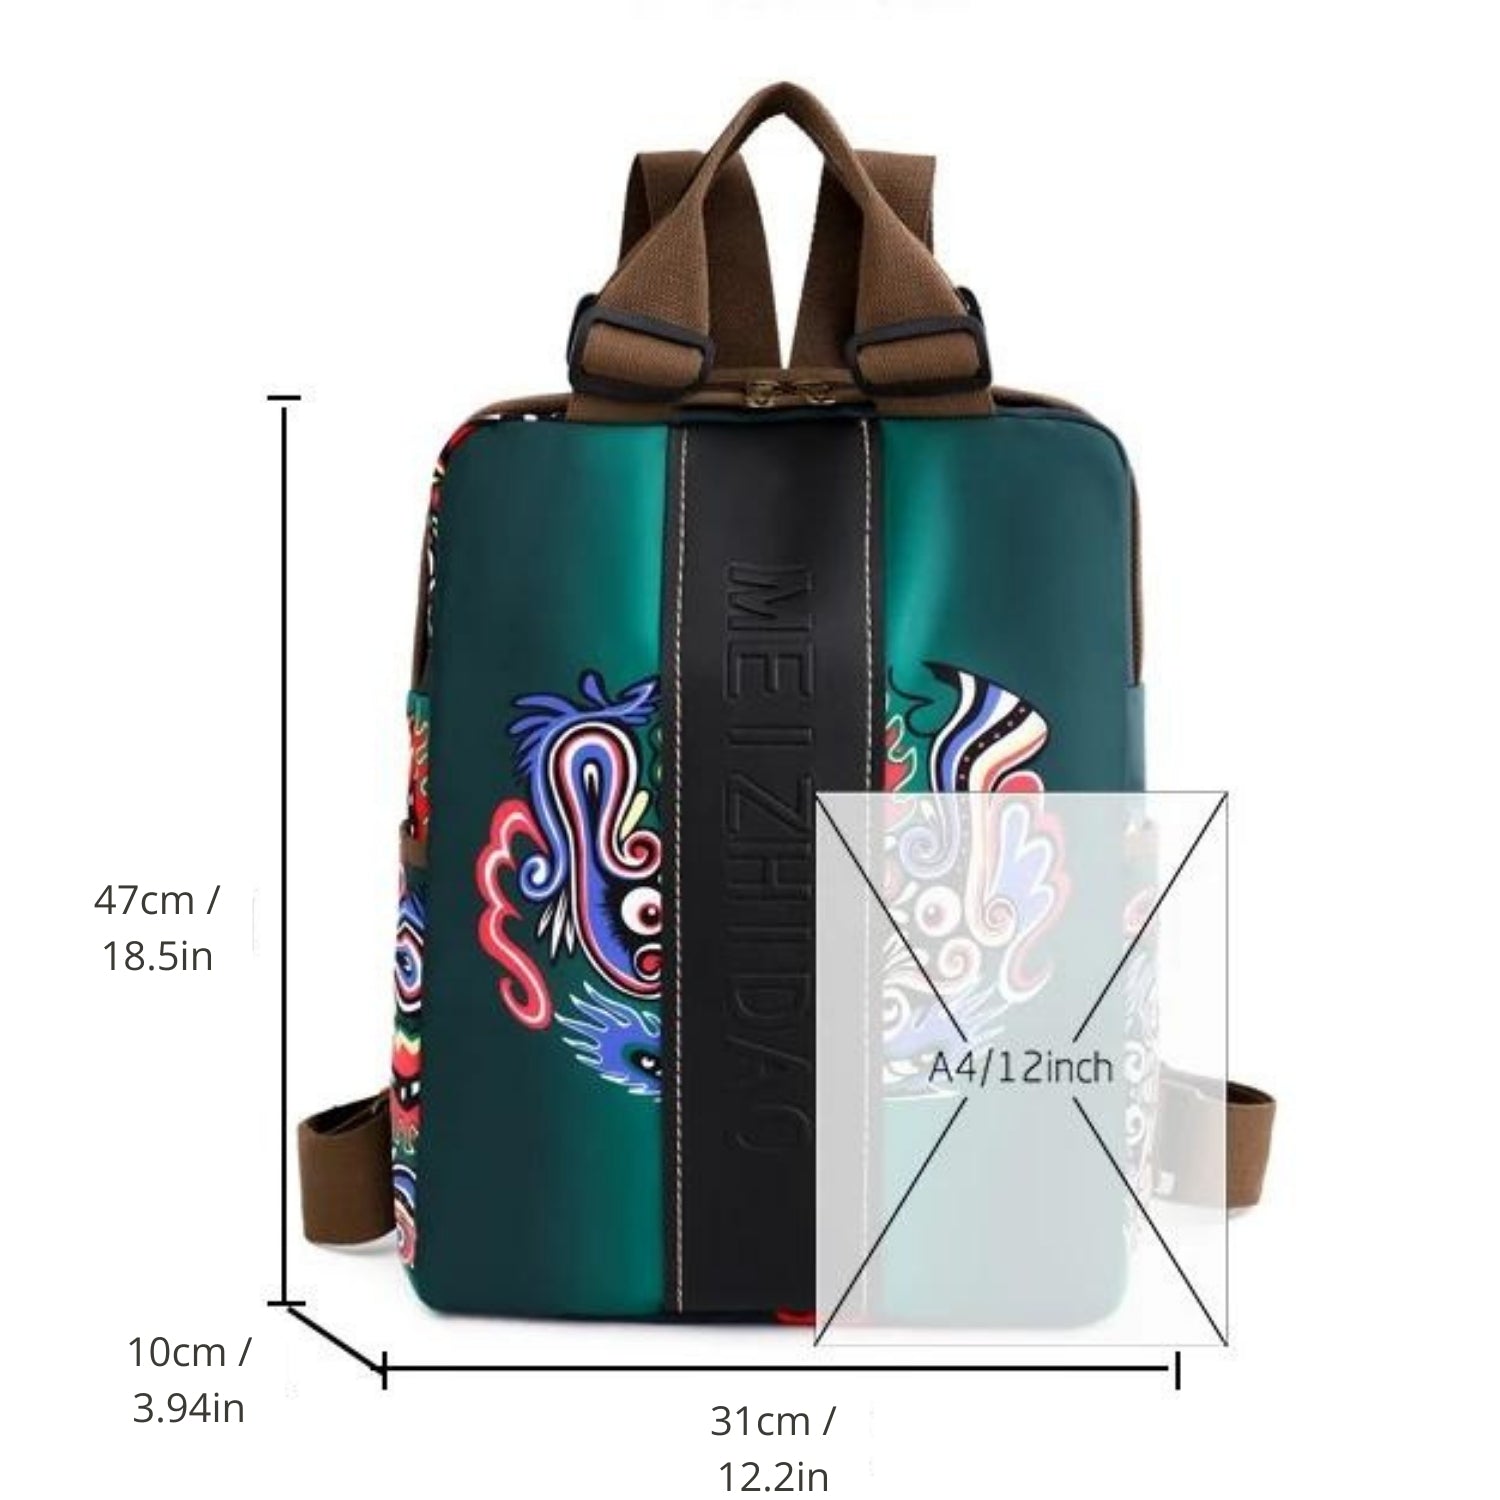 Bohemian Embroidered Backpack – Large Capacity Travel & Student Bag